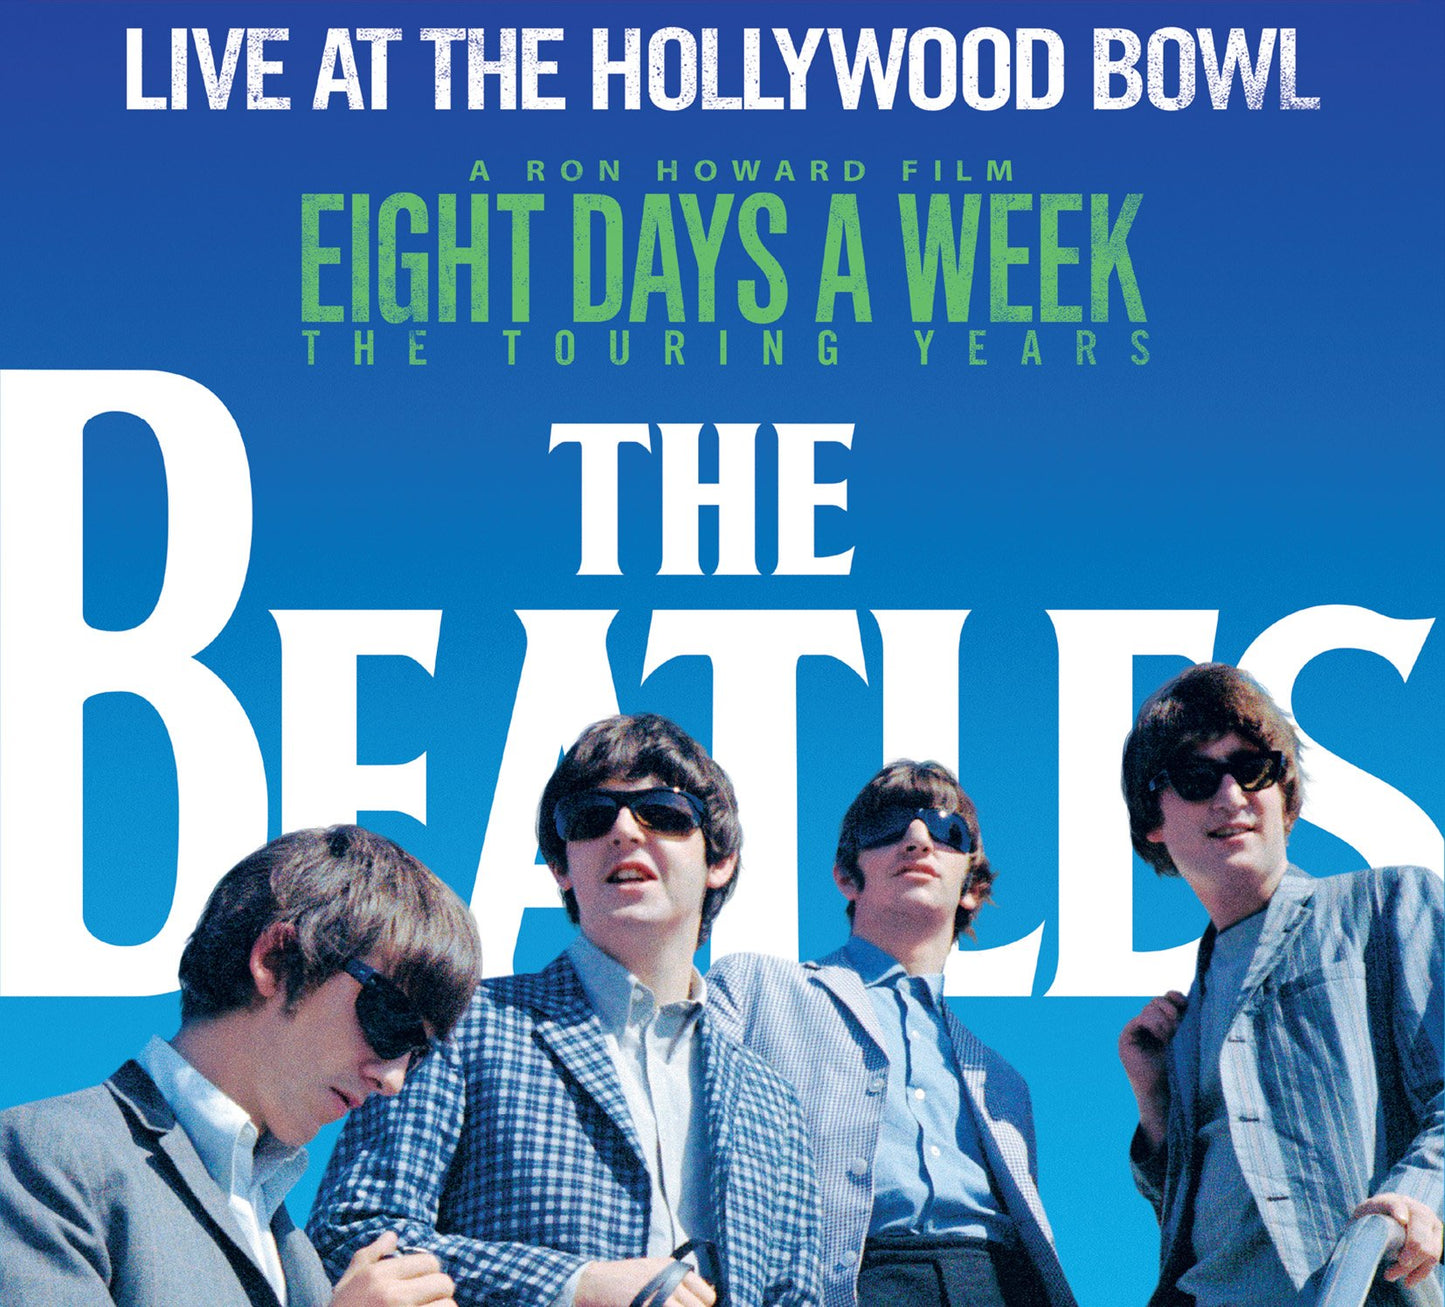 The Beatles / Live At The Hollywood Bowl